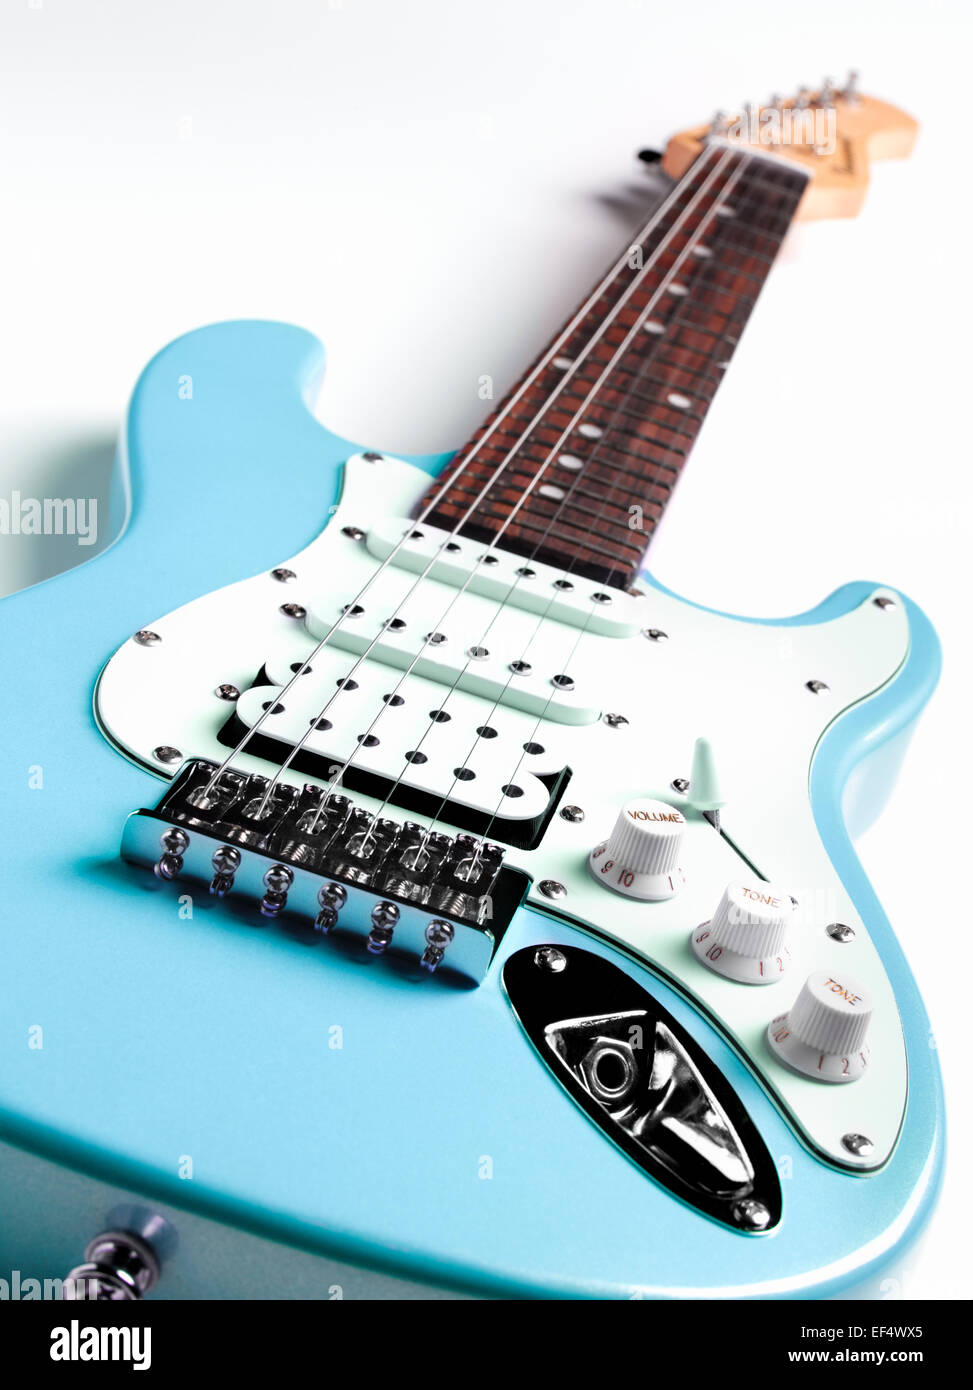 Powder Blue electric rock guitar performance, close up during break in performance Stock Photo